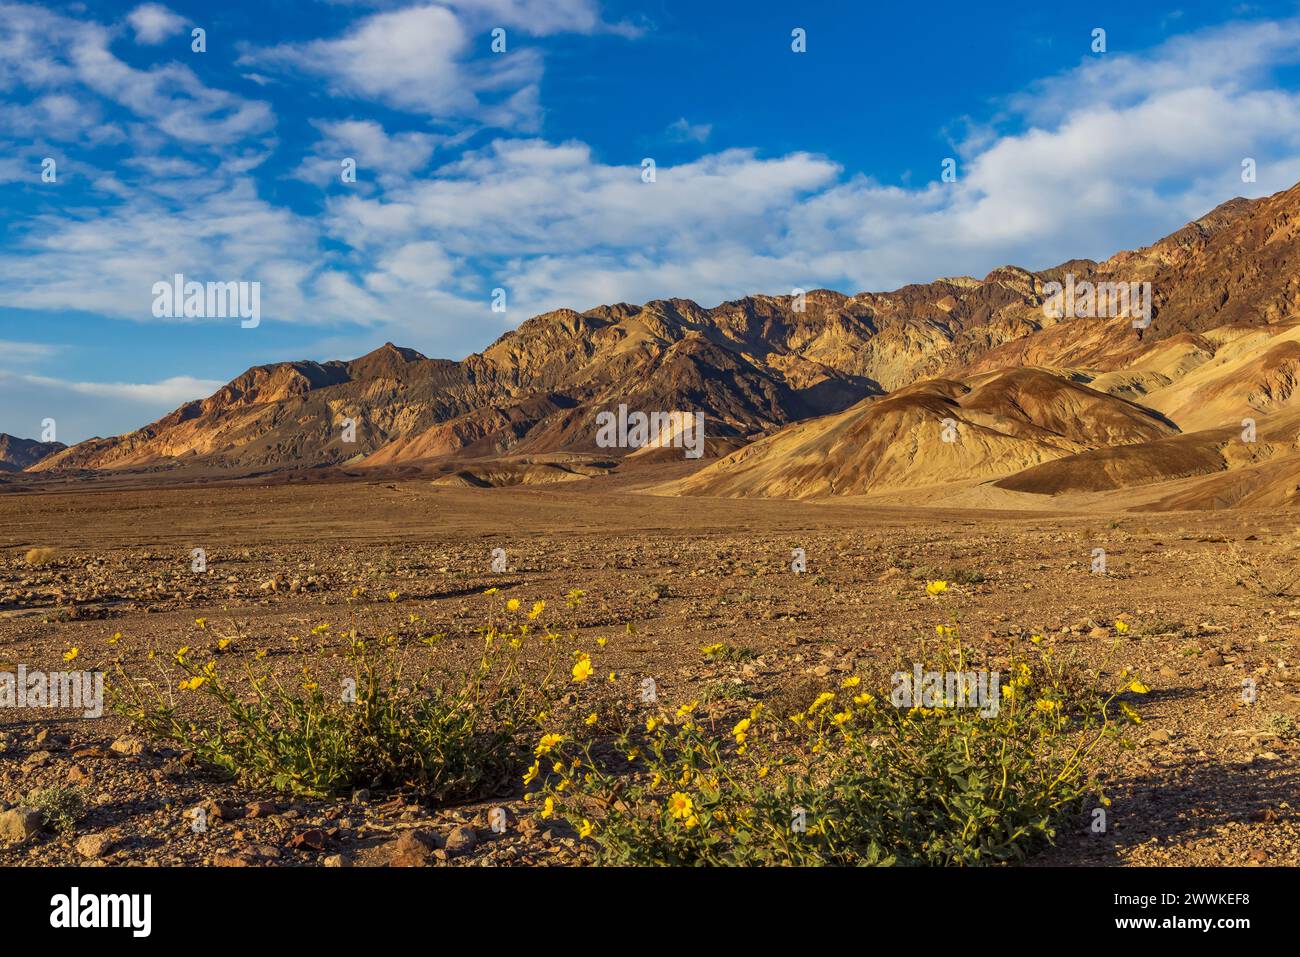 This is a late afternoon view of the Artists Palette area in the caramel-colored Amargosa Range of Death Valley National Park, Inyo County, CA, USA. Stock Photo